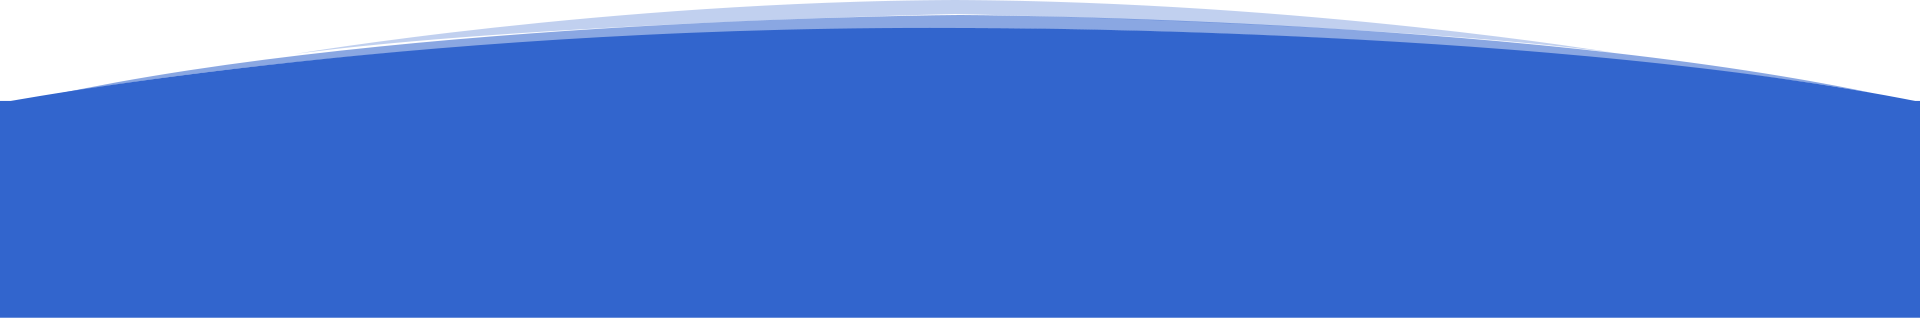 A blue background with a white line on it.